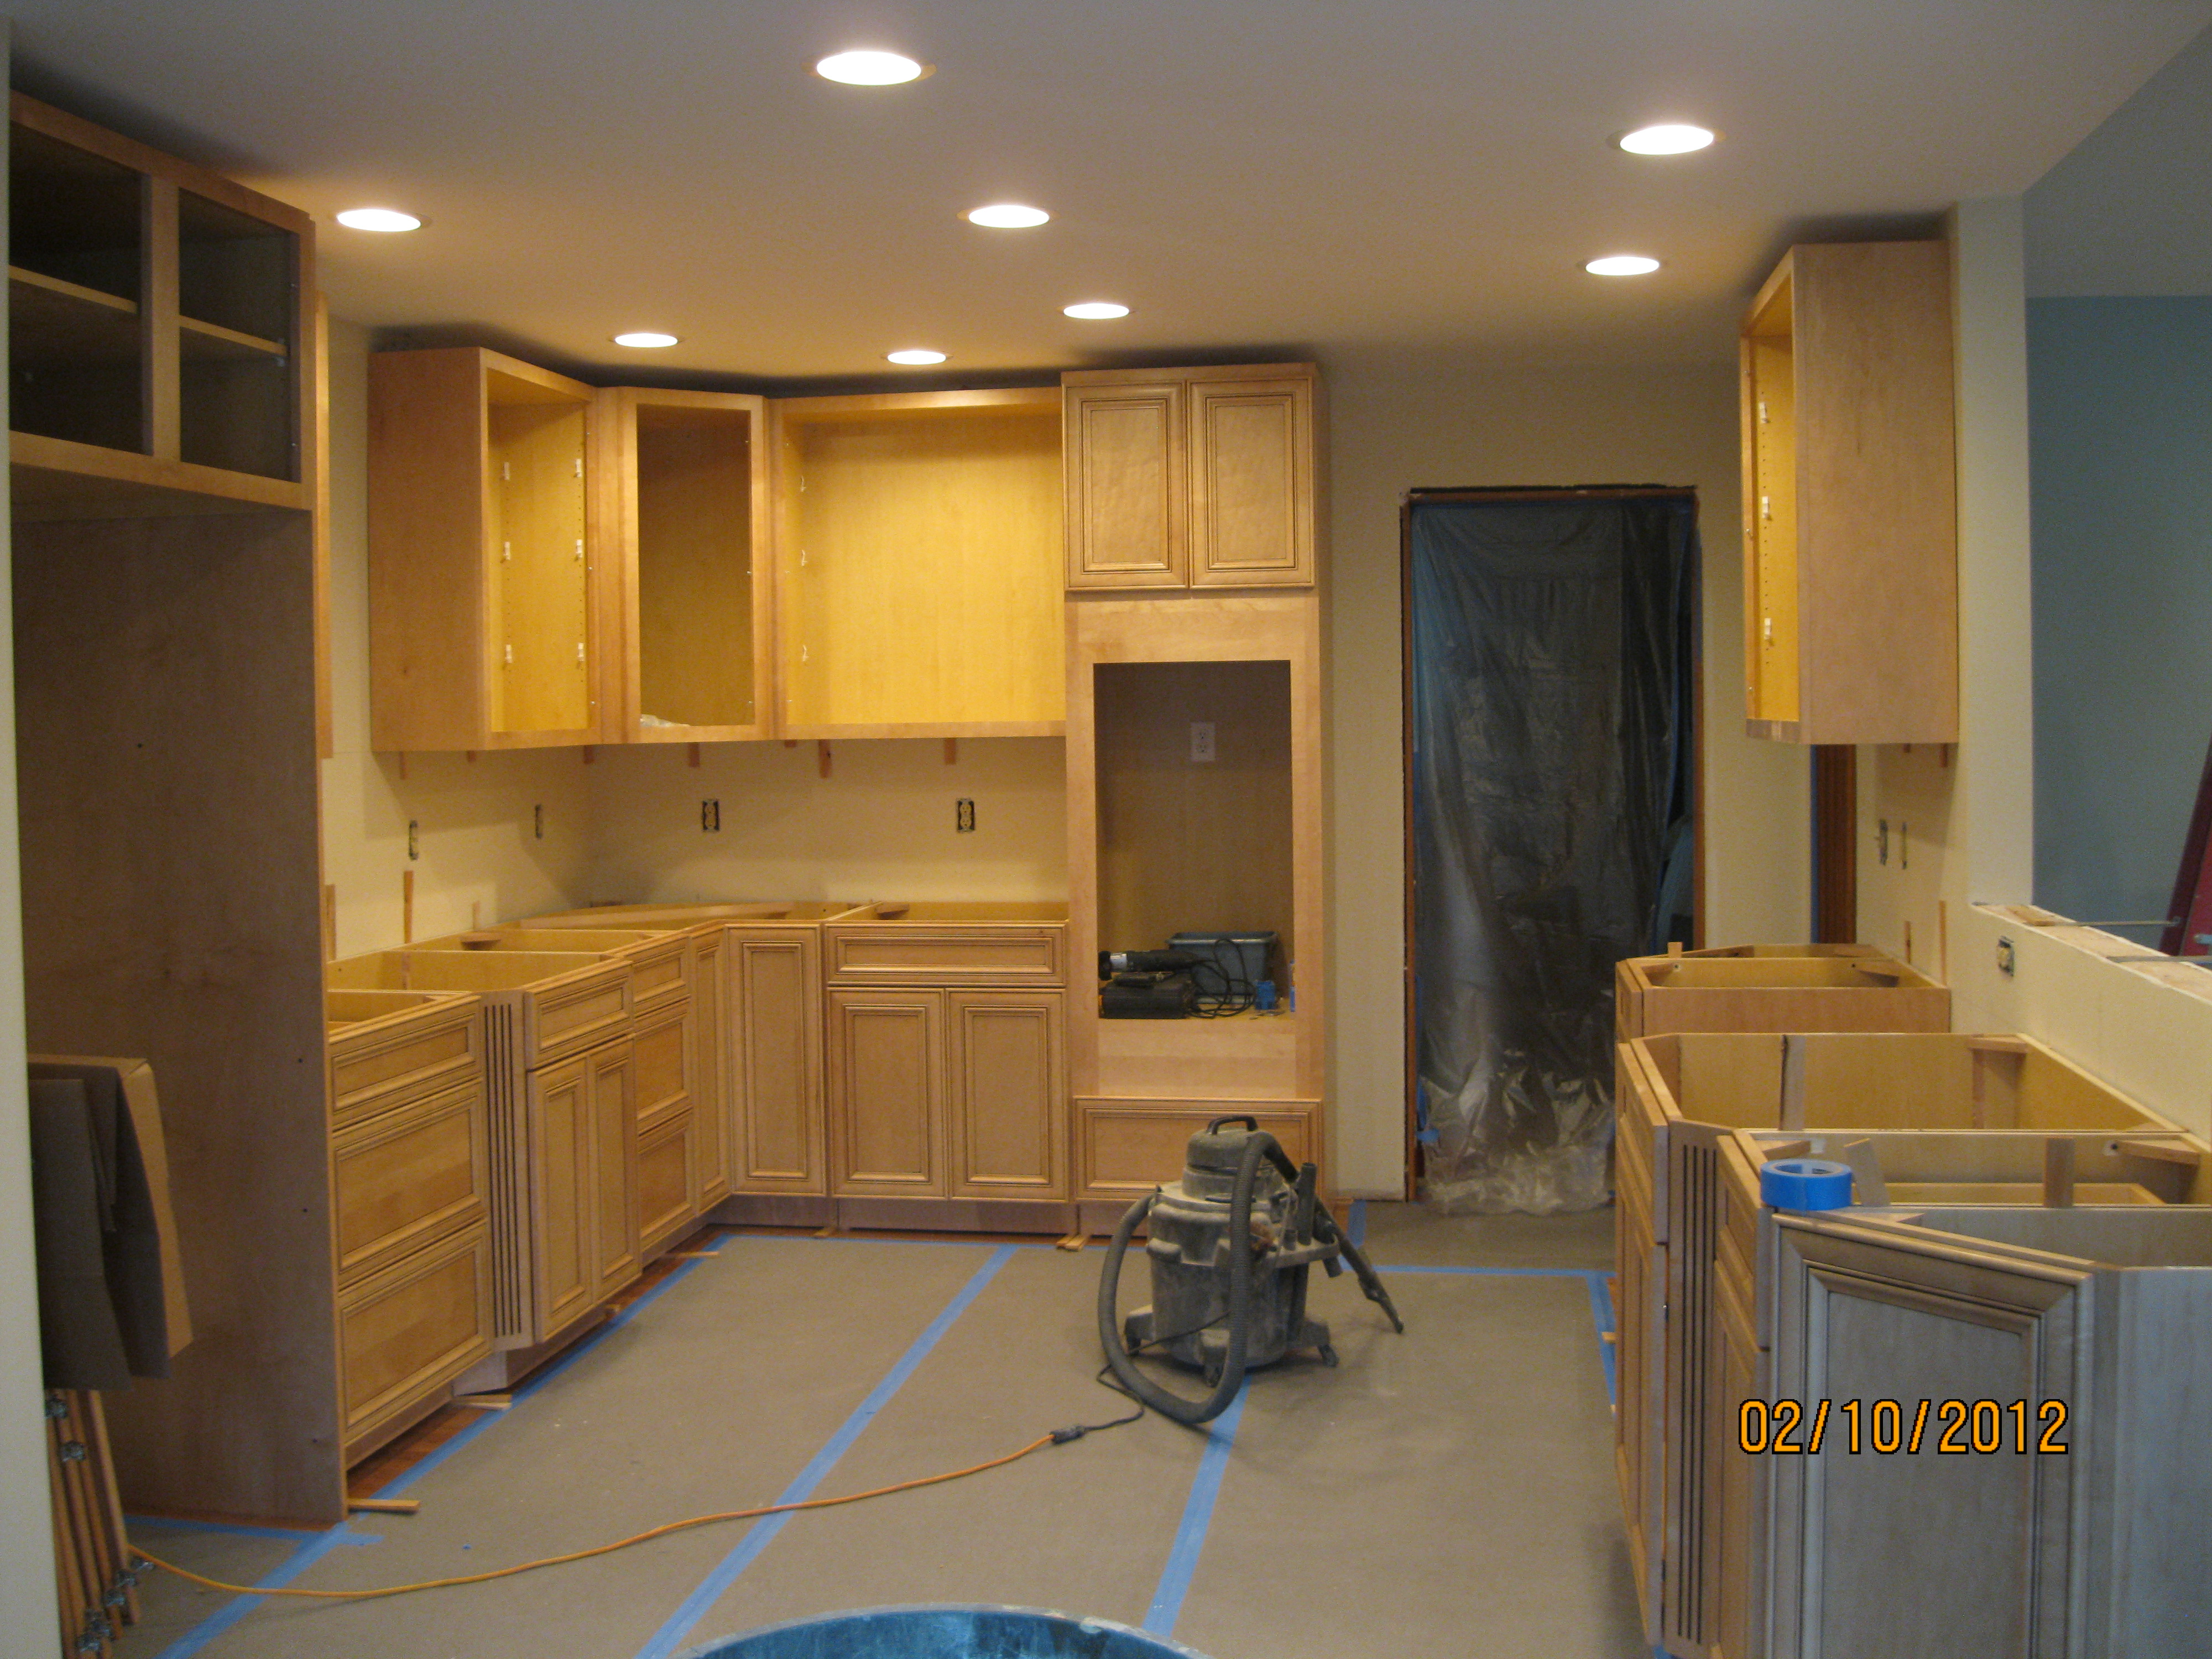 West Chester Kitchen Finish Cabinets And Paint Remodeling